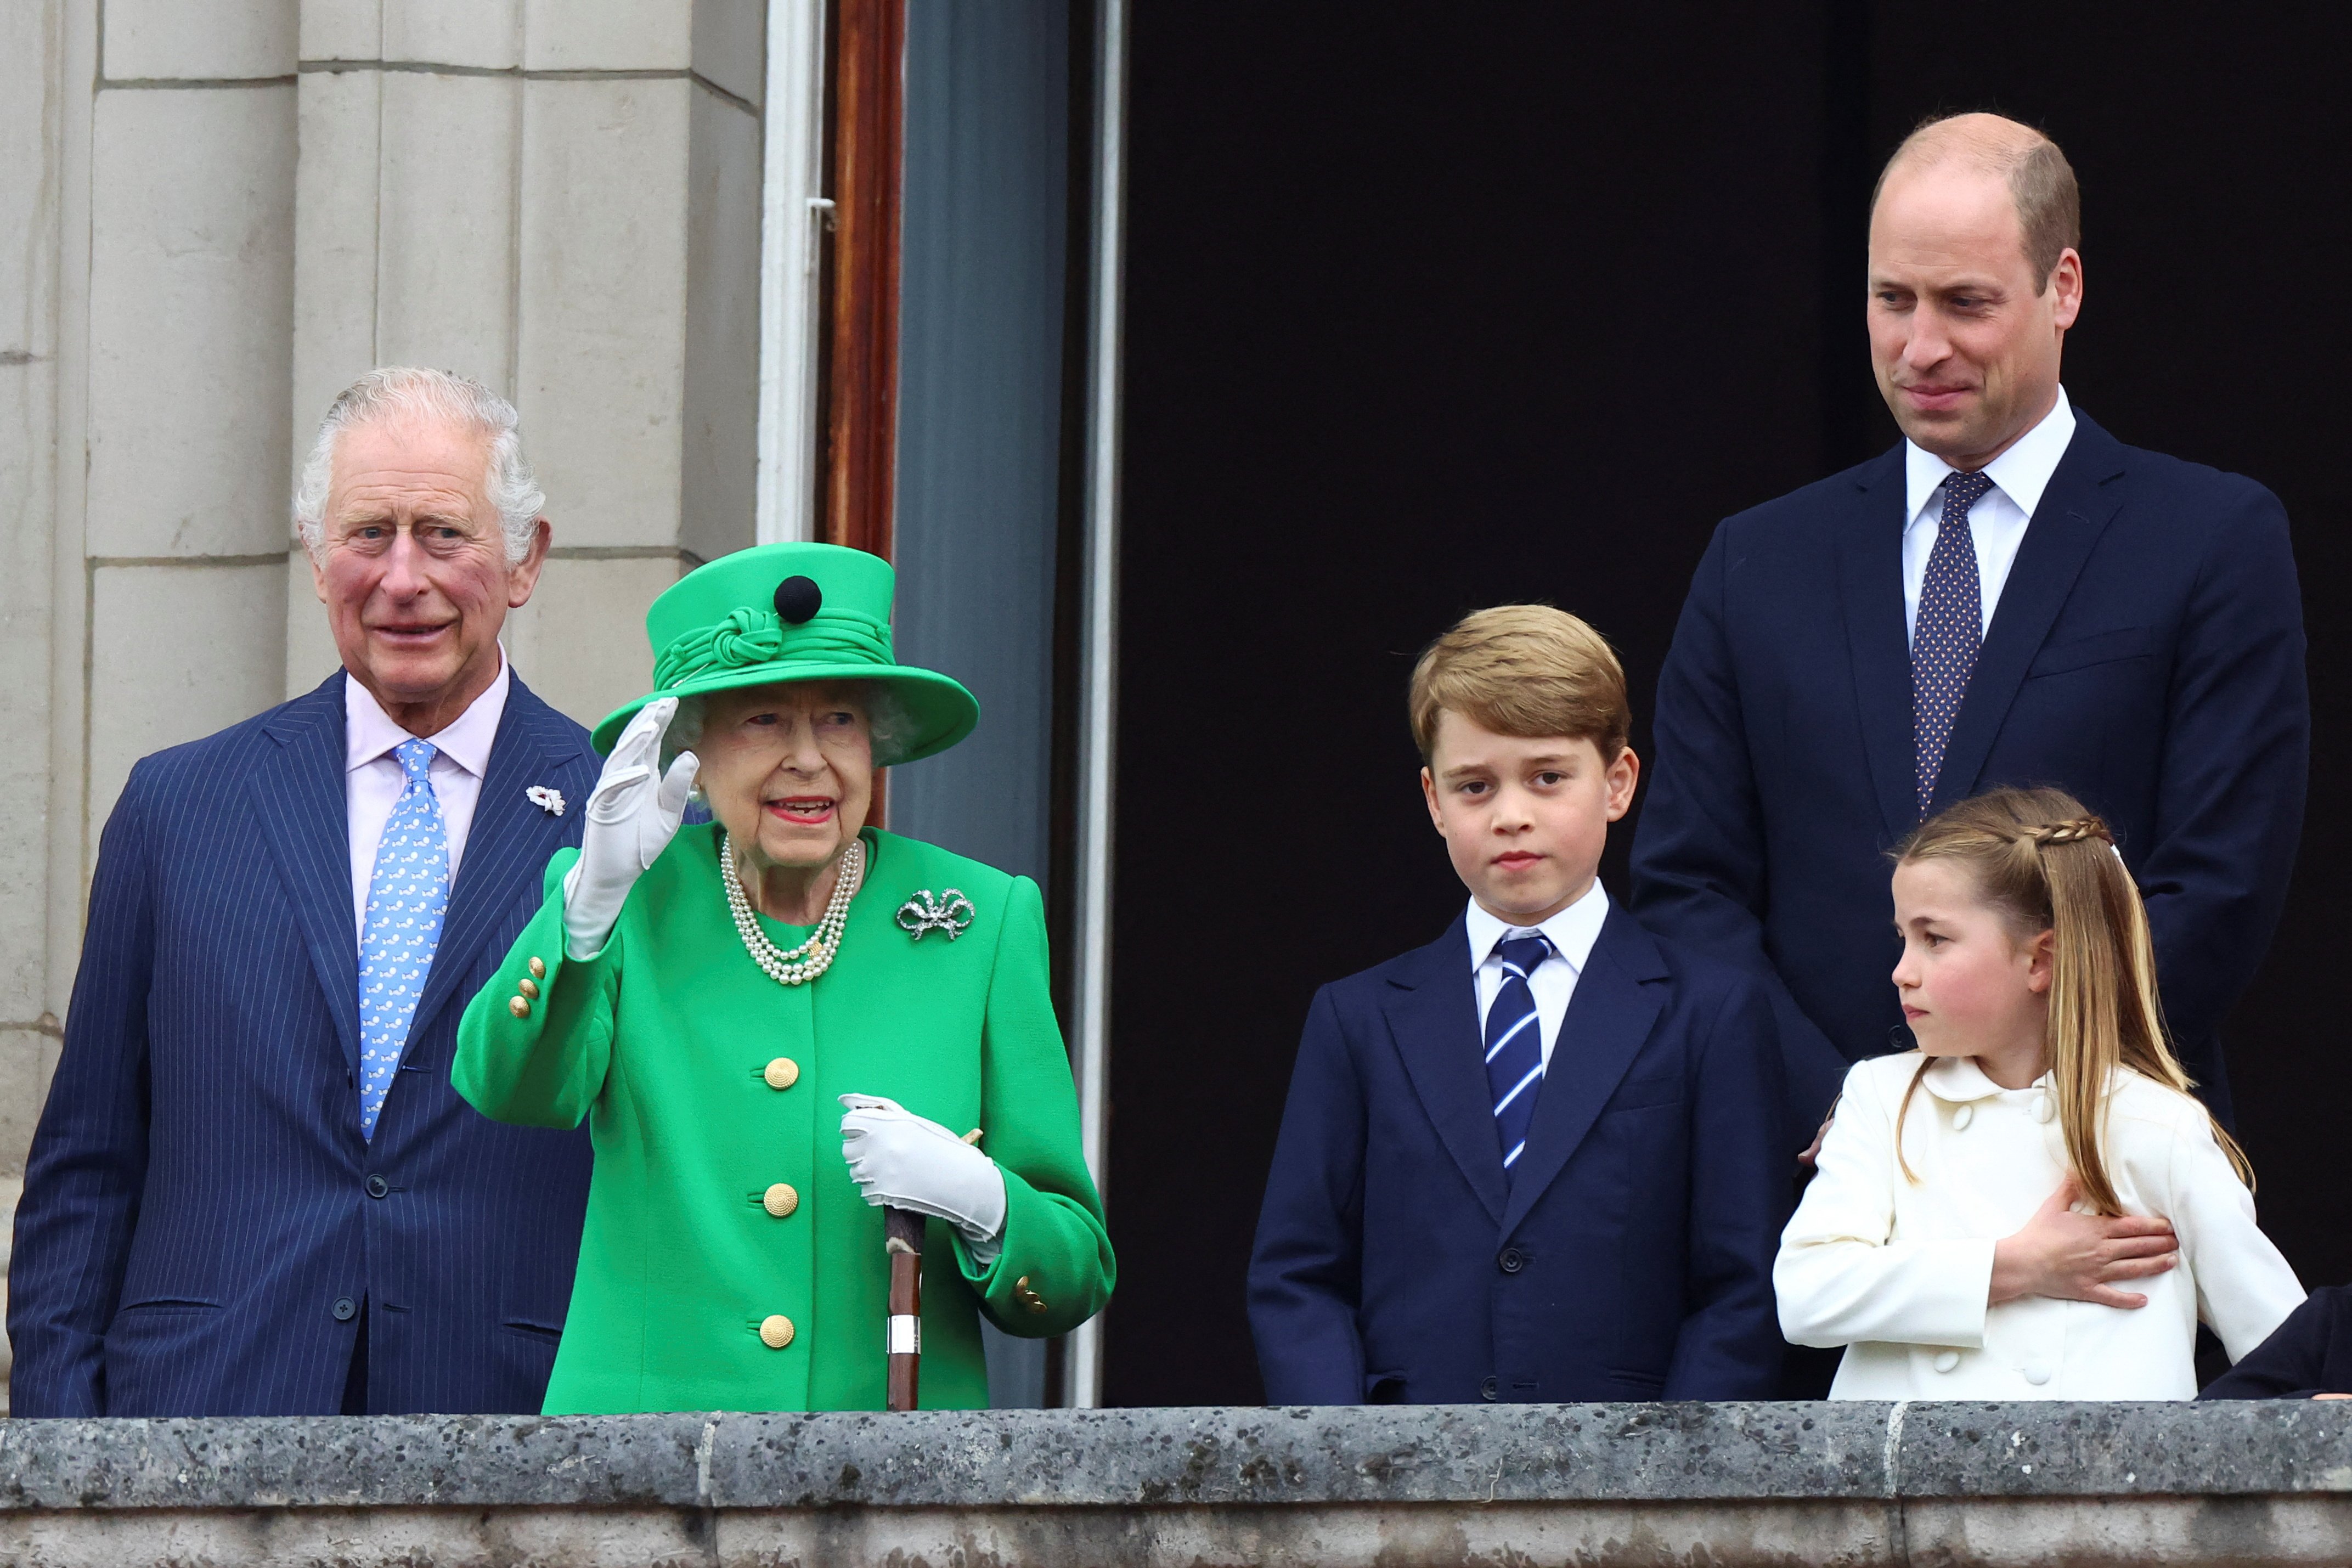 King Charles, Queen Elizabeth II, Prince George, Prince William and Princess Charlotte stand on a balcony during the Platinum Jubilee parade on June 5, 2022 in London, England.  |  Source: Getty Images